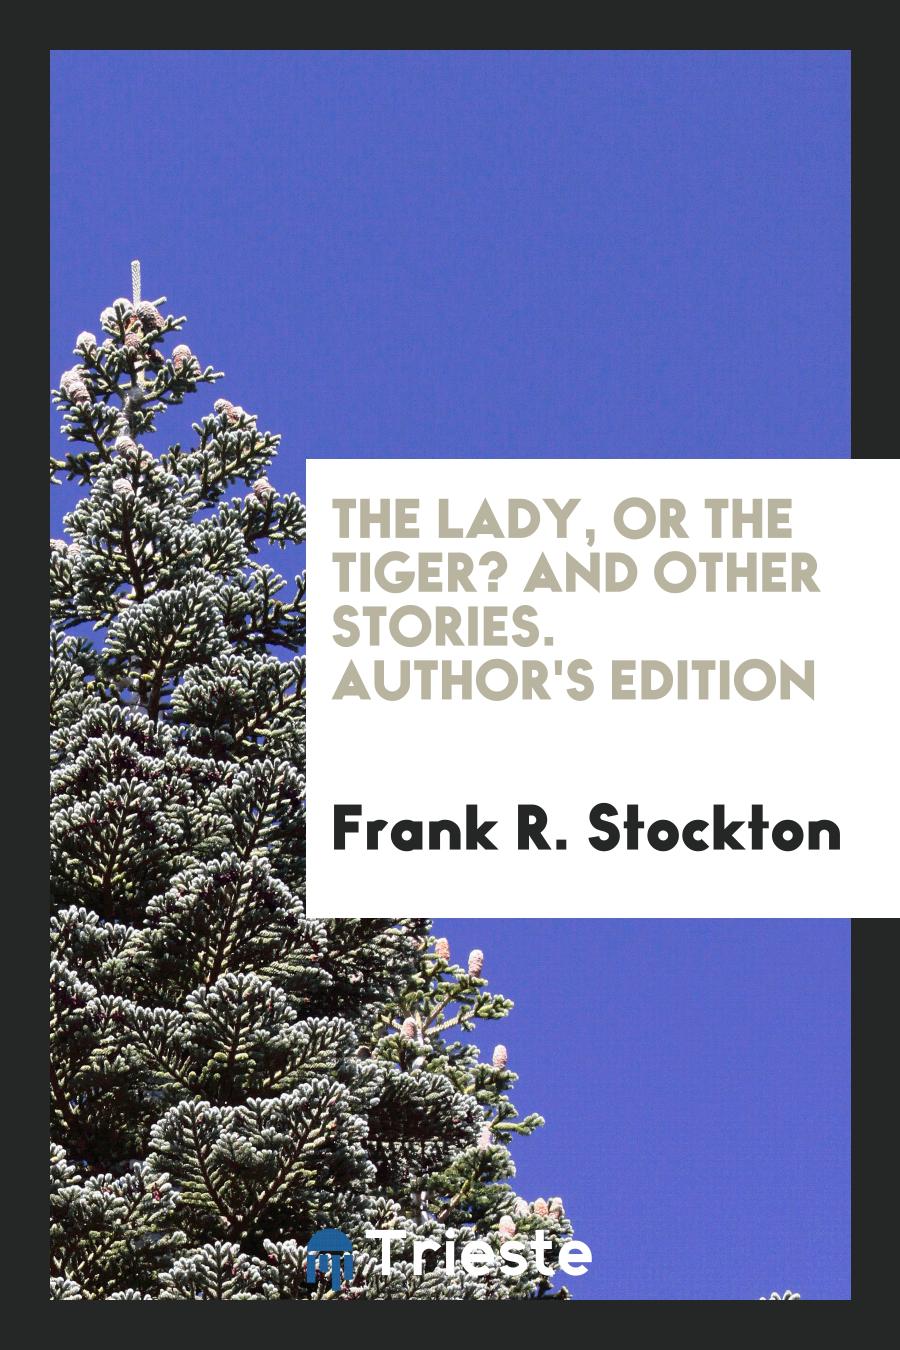 The Lady, or the Tiger? And Other Stories. Author's Edition